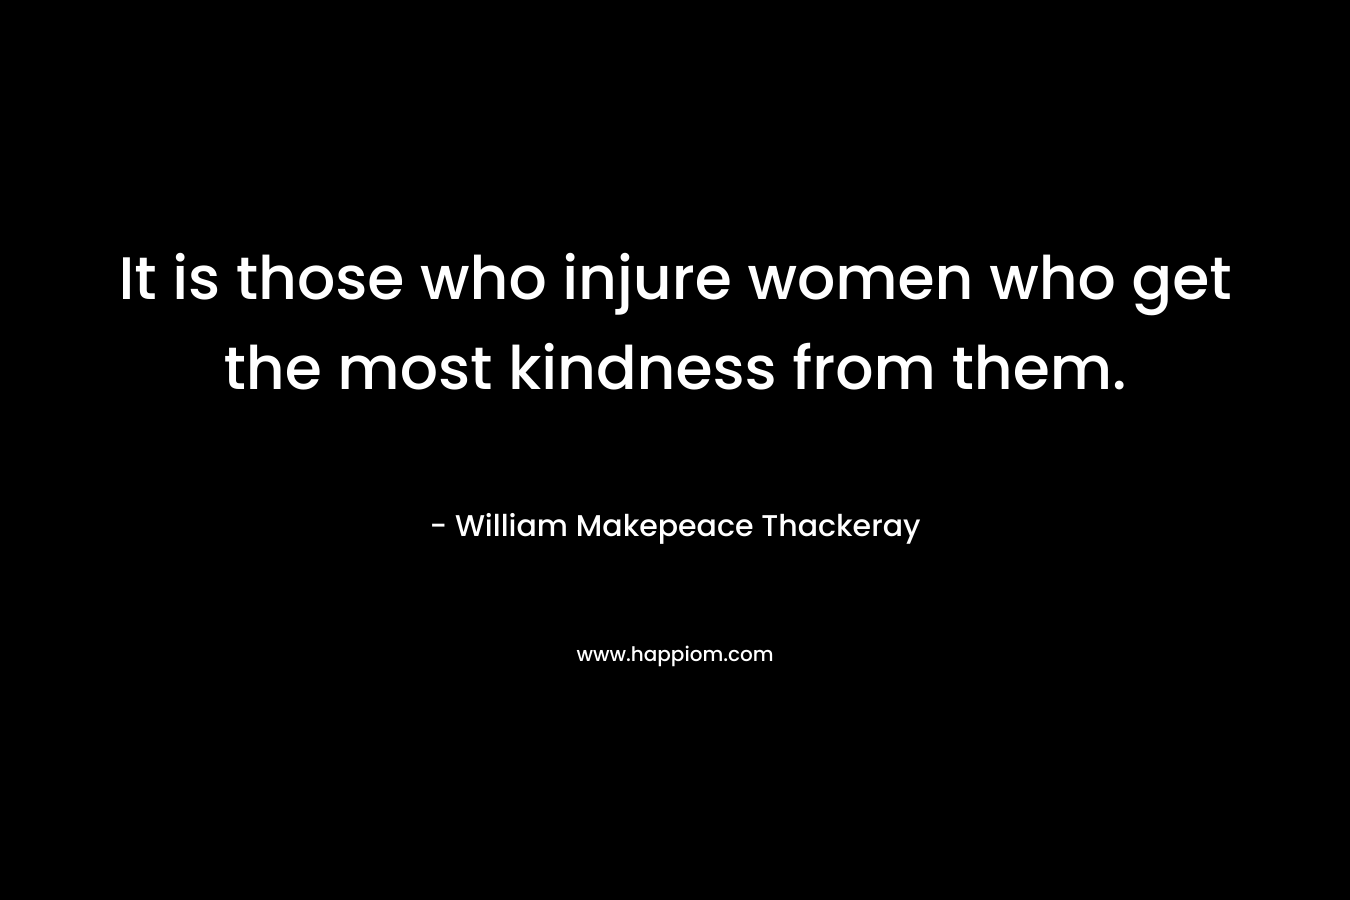 It is those who injure women who get the most kindness from them. – William Makepeace Thackeray